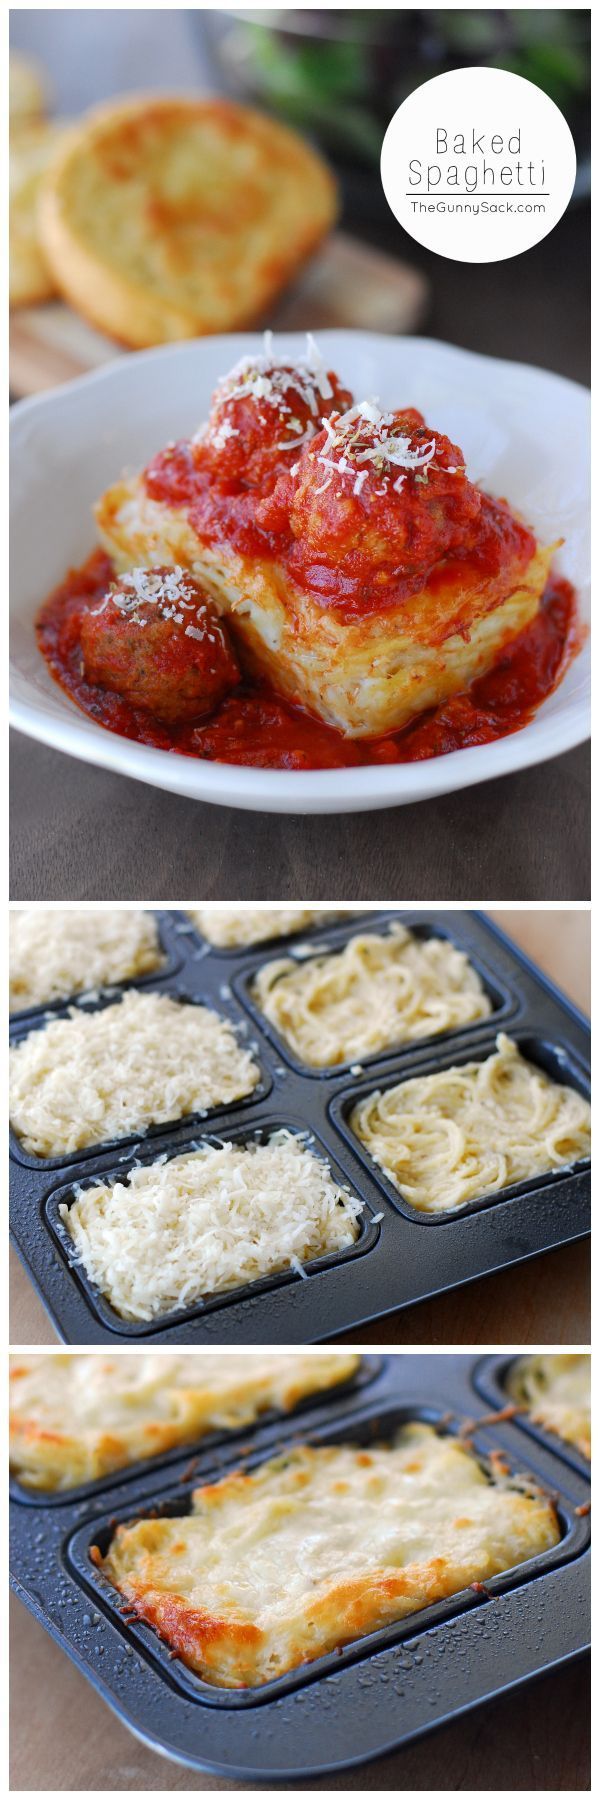 This Baked Spaghetti recipe is for mini loaves of creamy Alfredo baked spaghetti topped with meatballs and marinara sauce. It’s